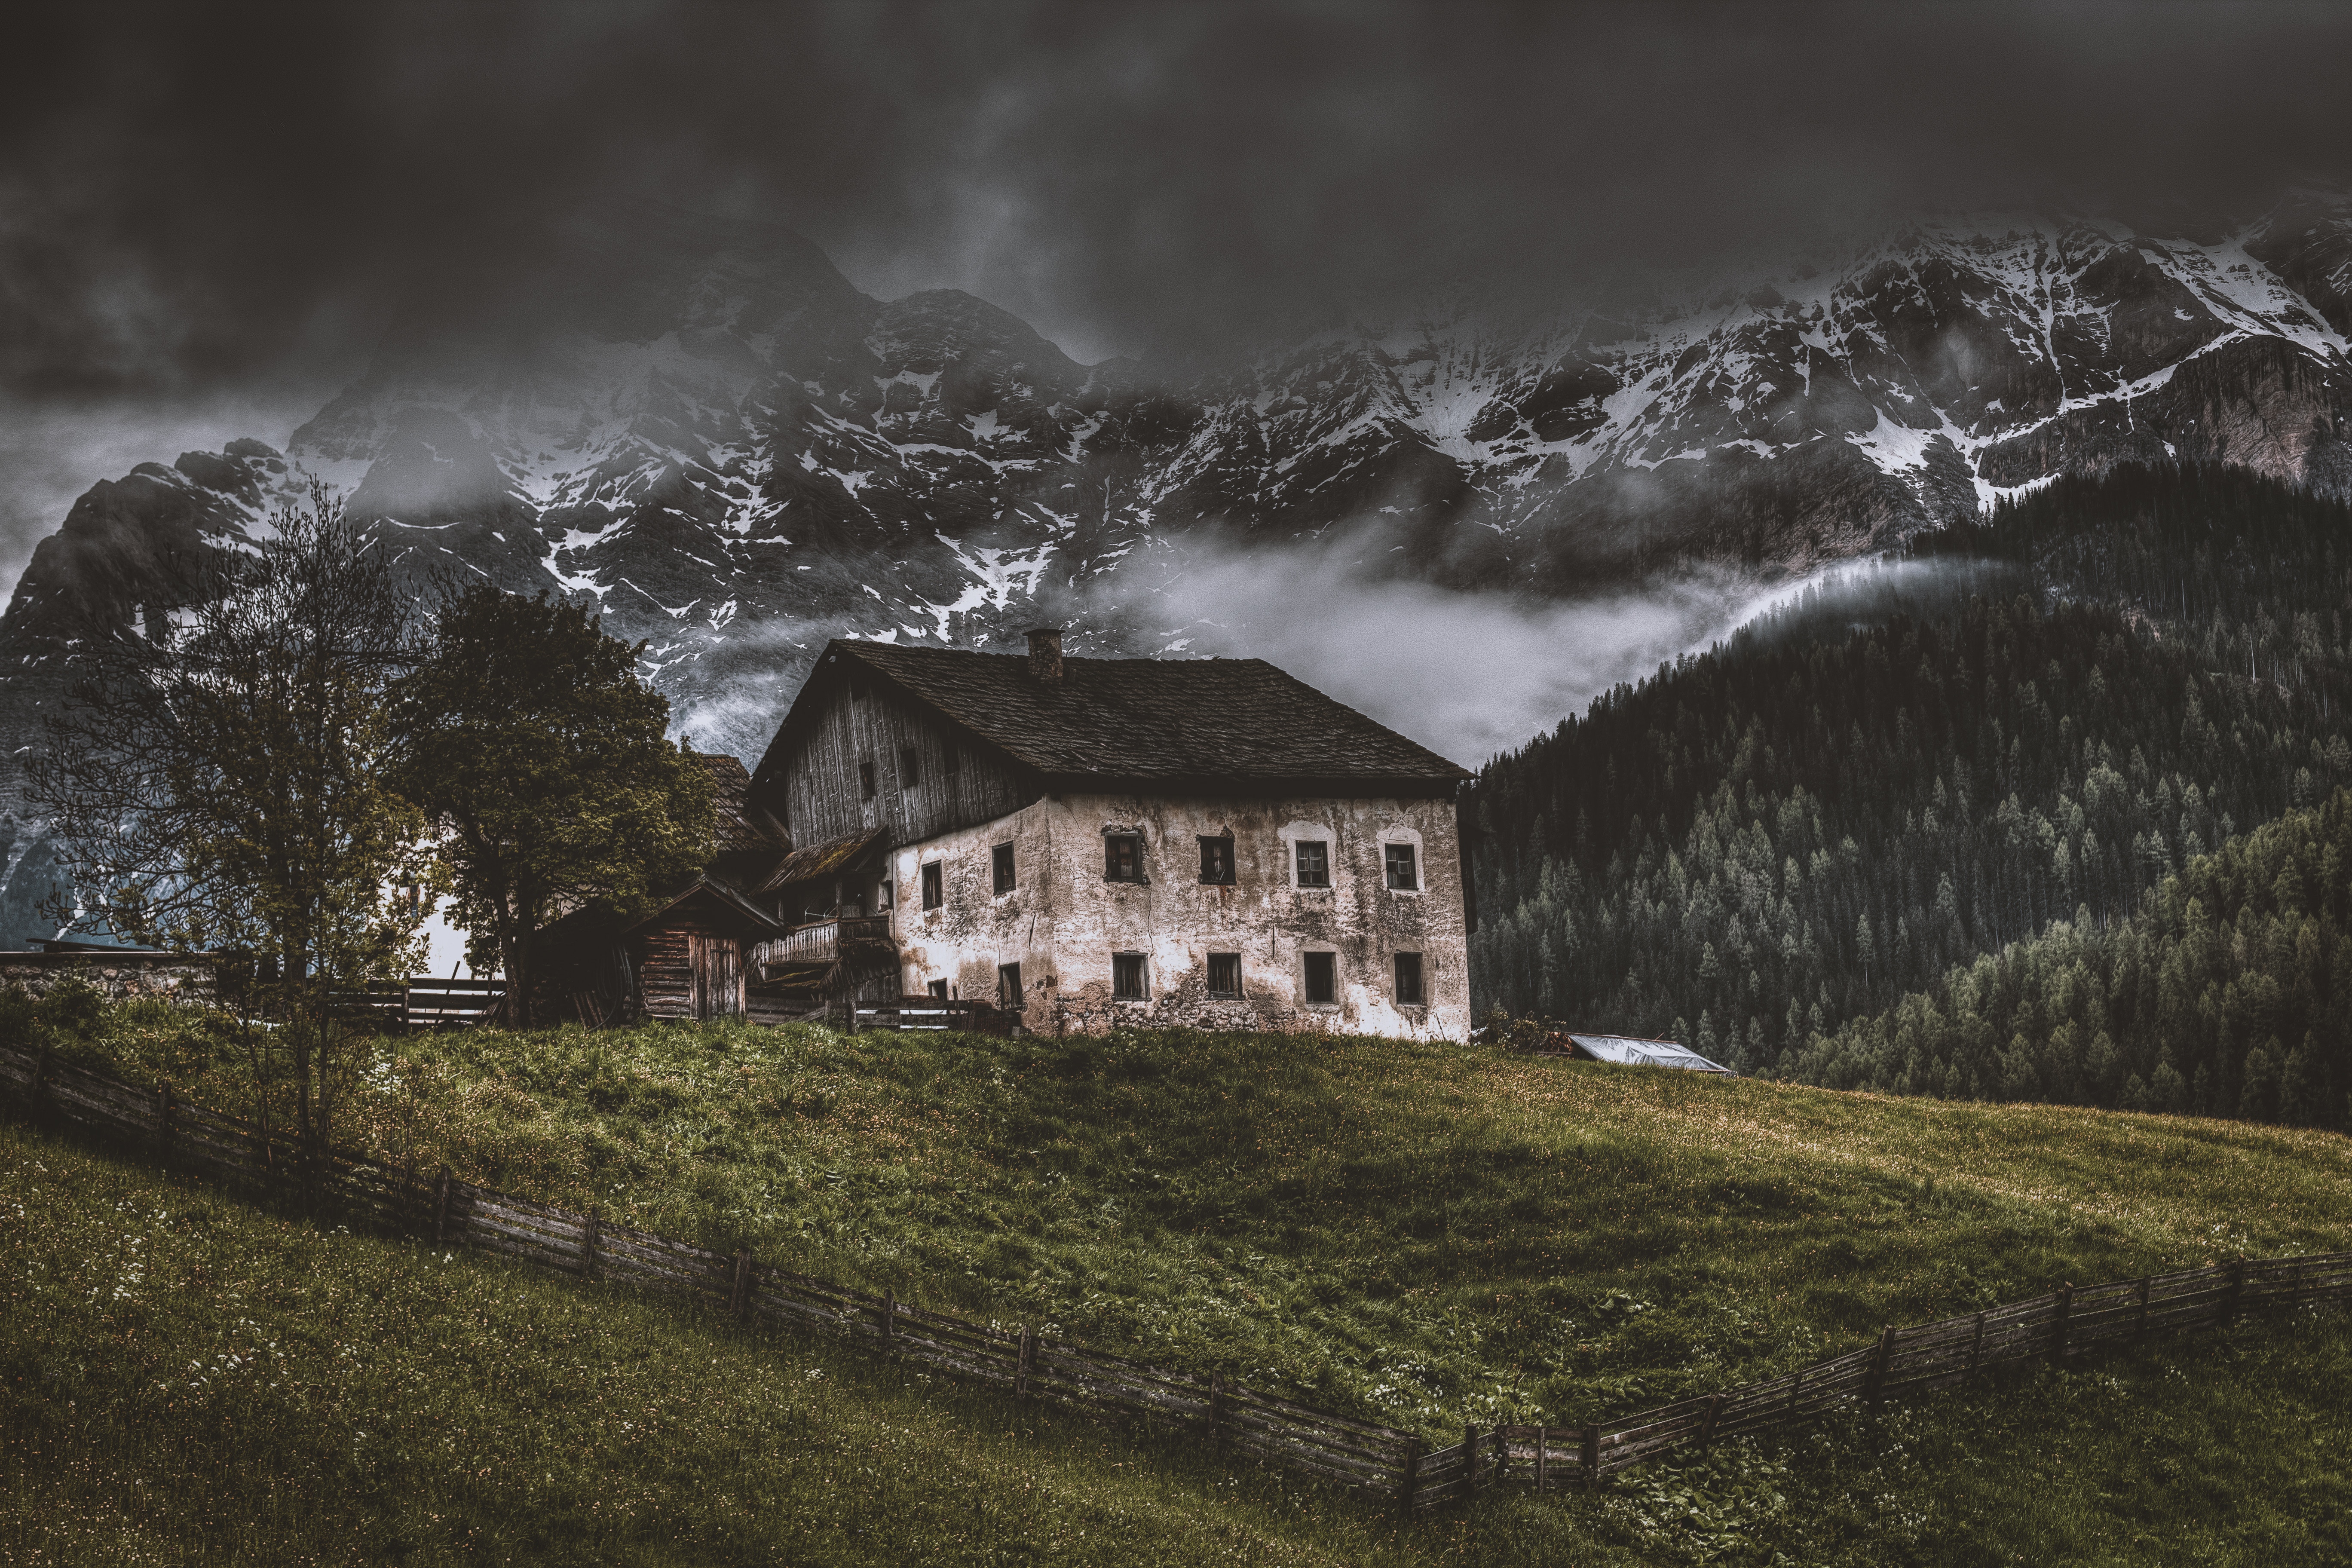 mountains, nature, grass, privacy, seclusion, fog, house, old, fencing, enclosure